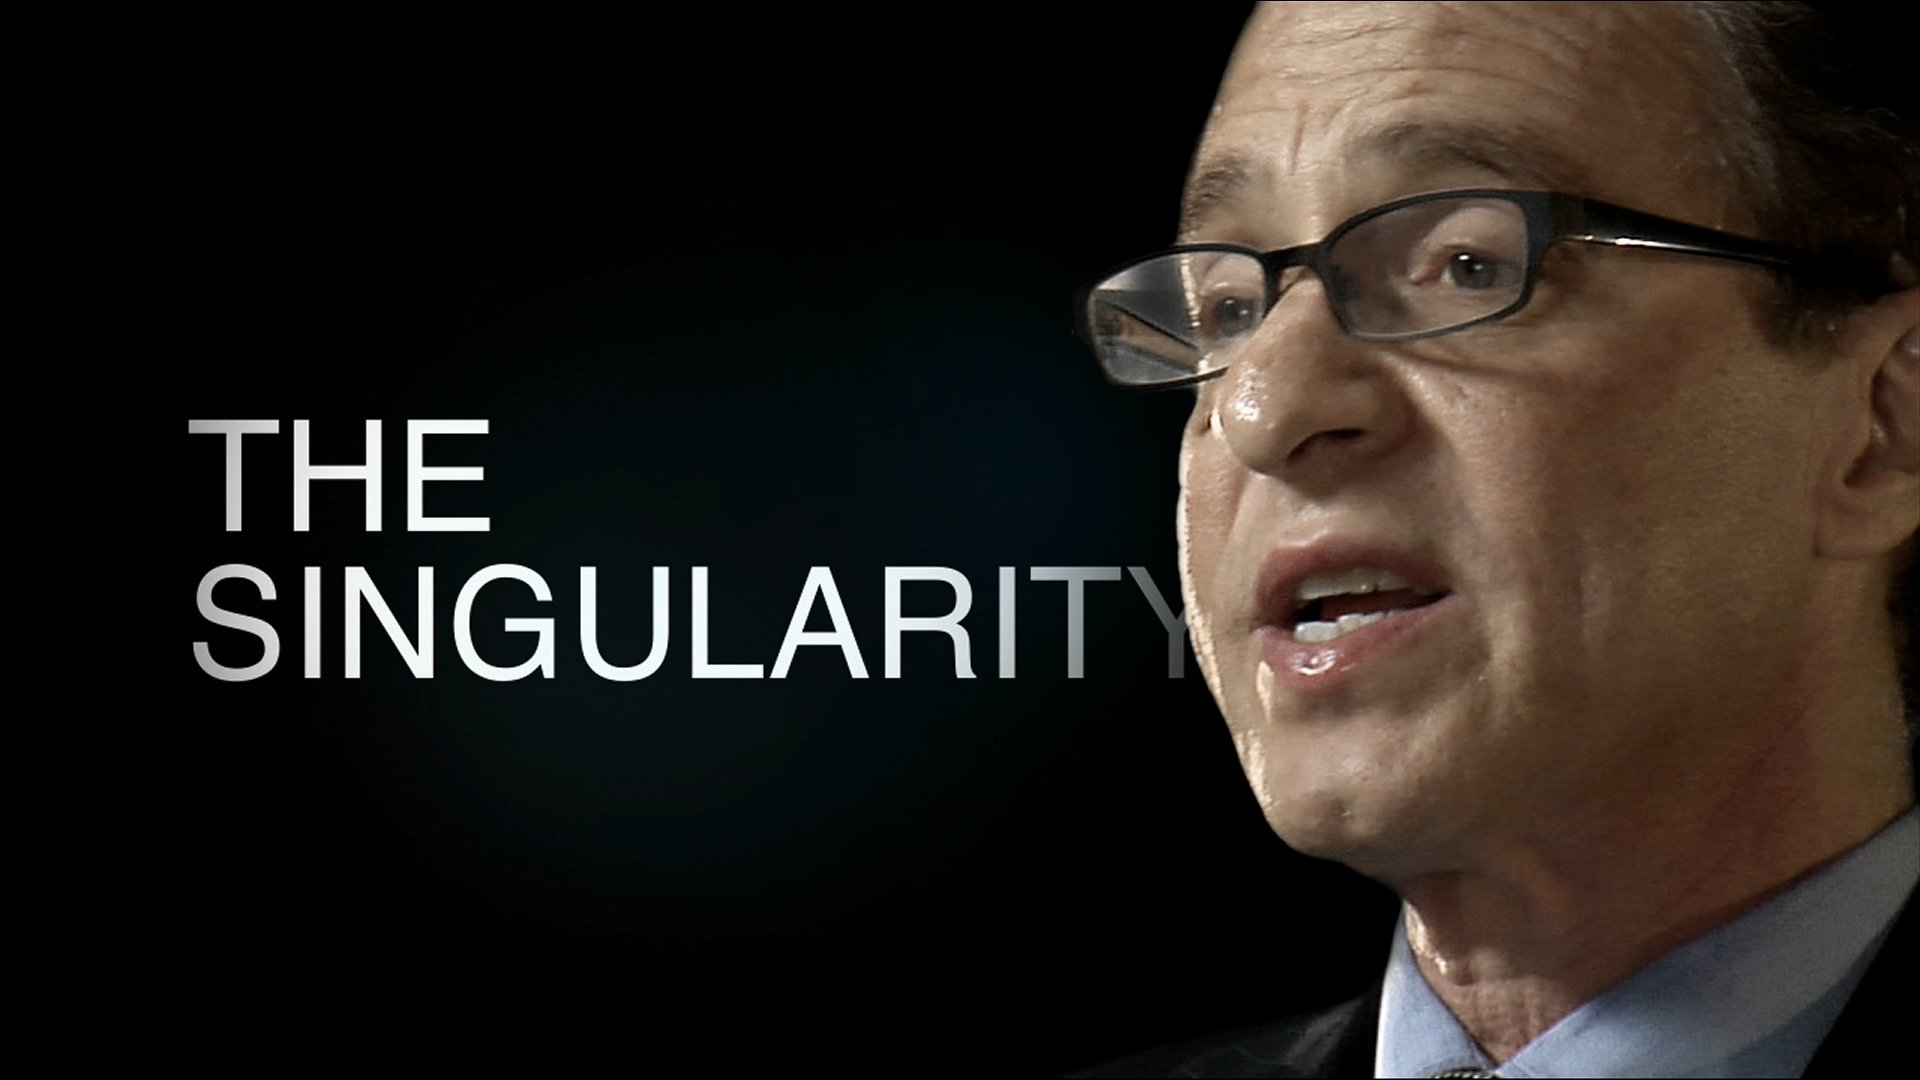 Ray Kurzweil discusses the Singularity in Transcendent Man.